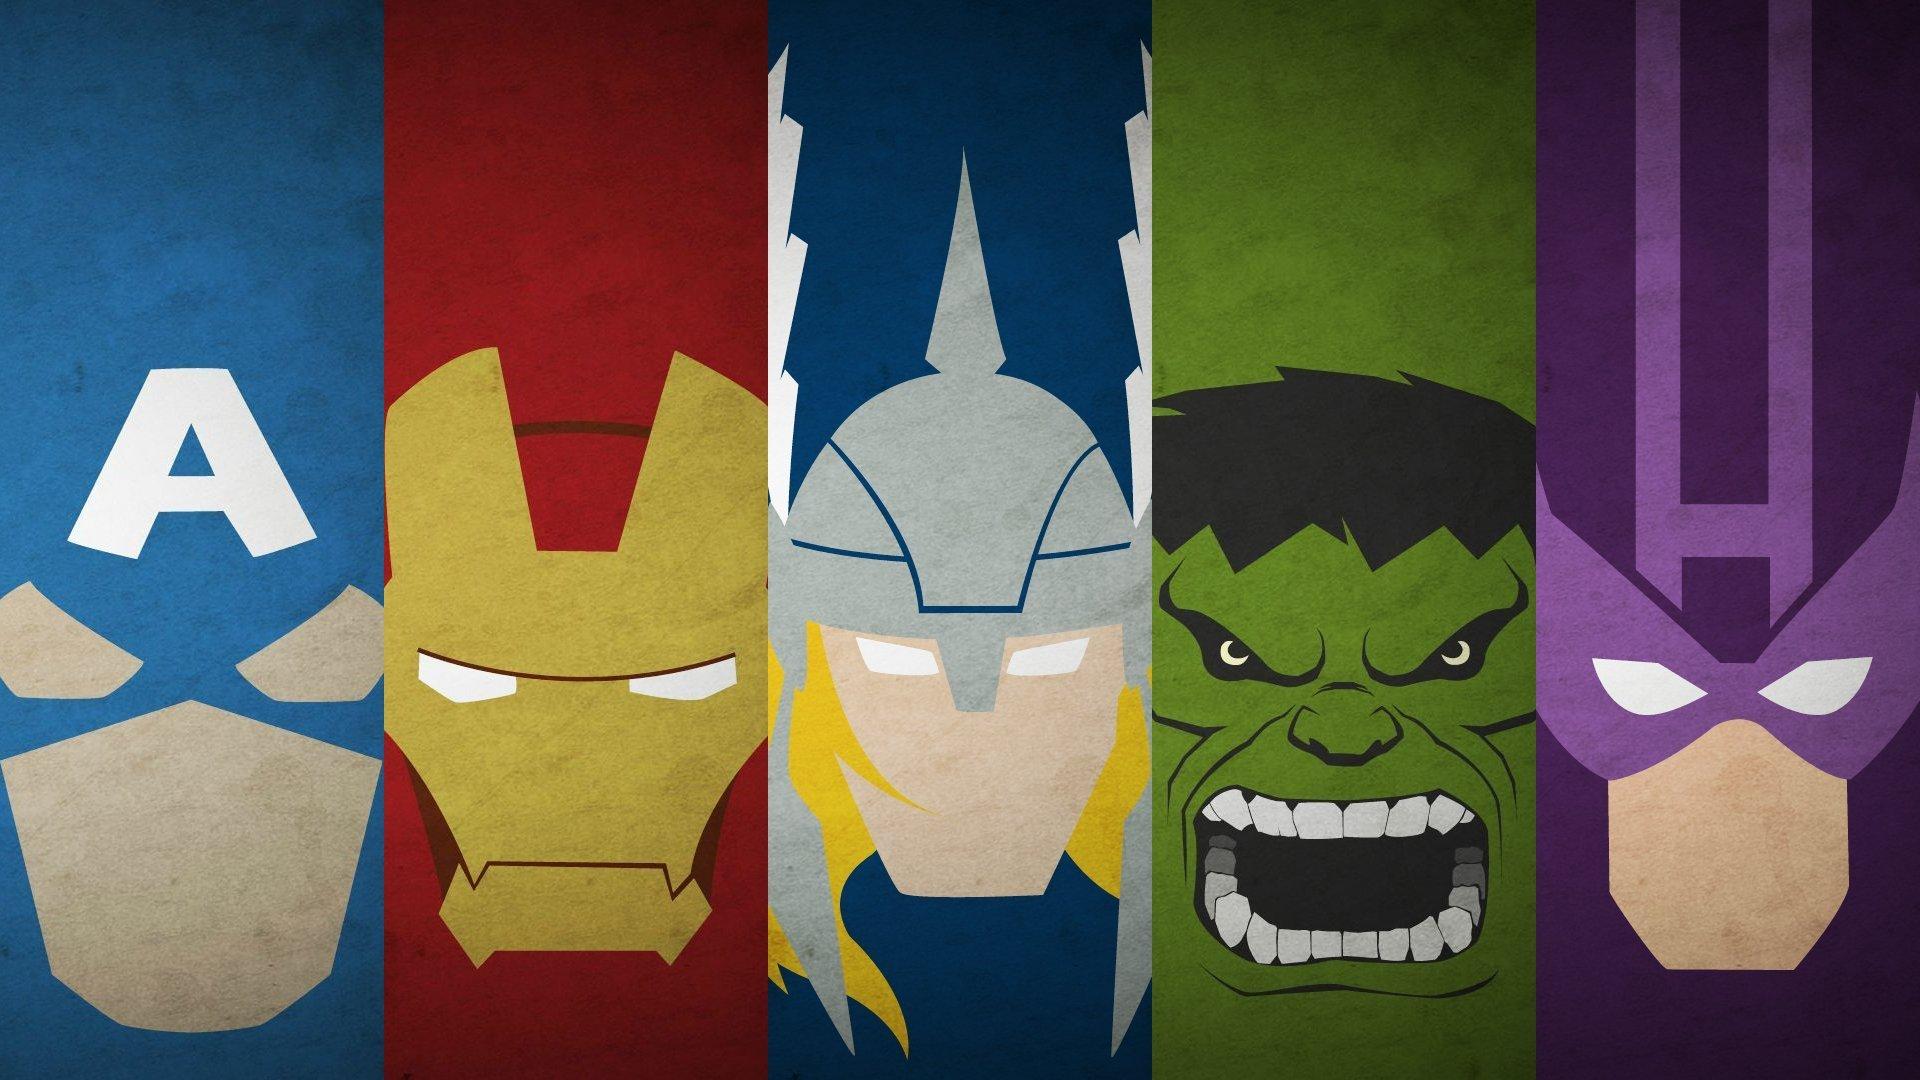 Minimalist HD Avengers Wallpaper to get you ready for Infinity War